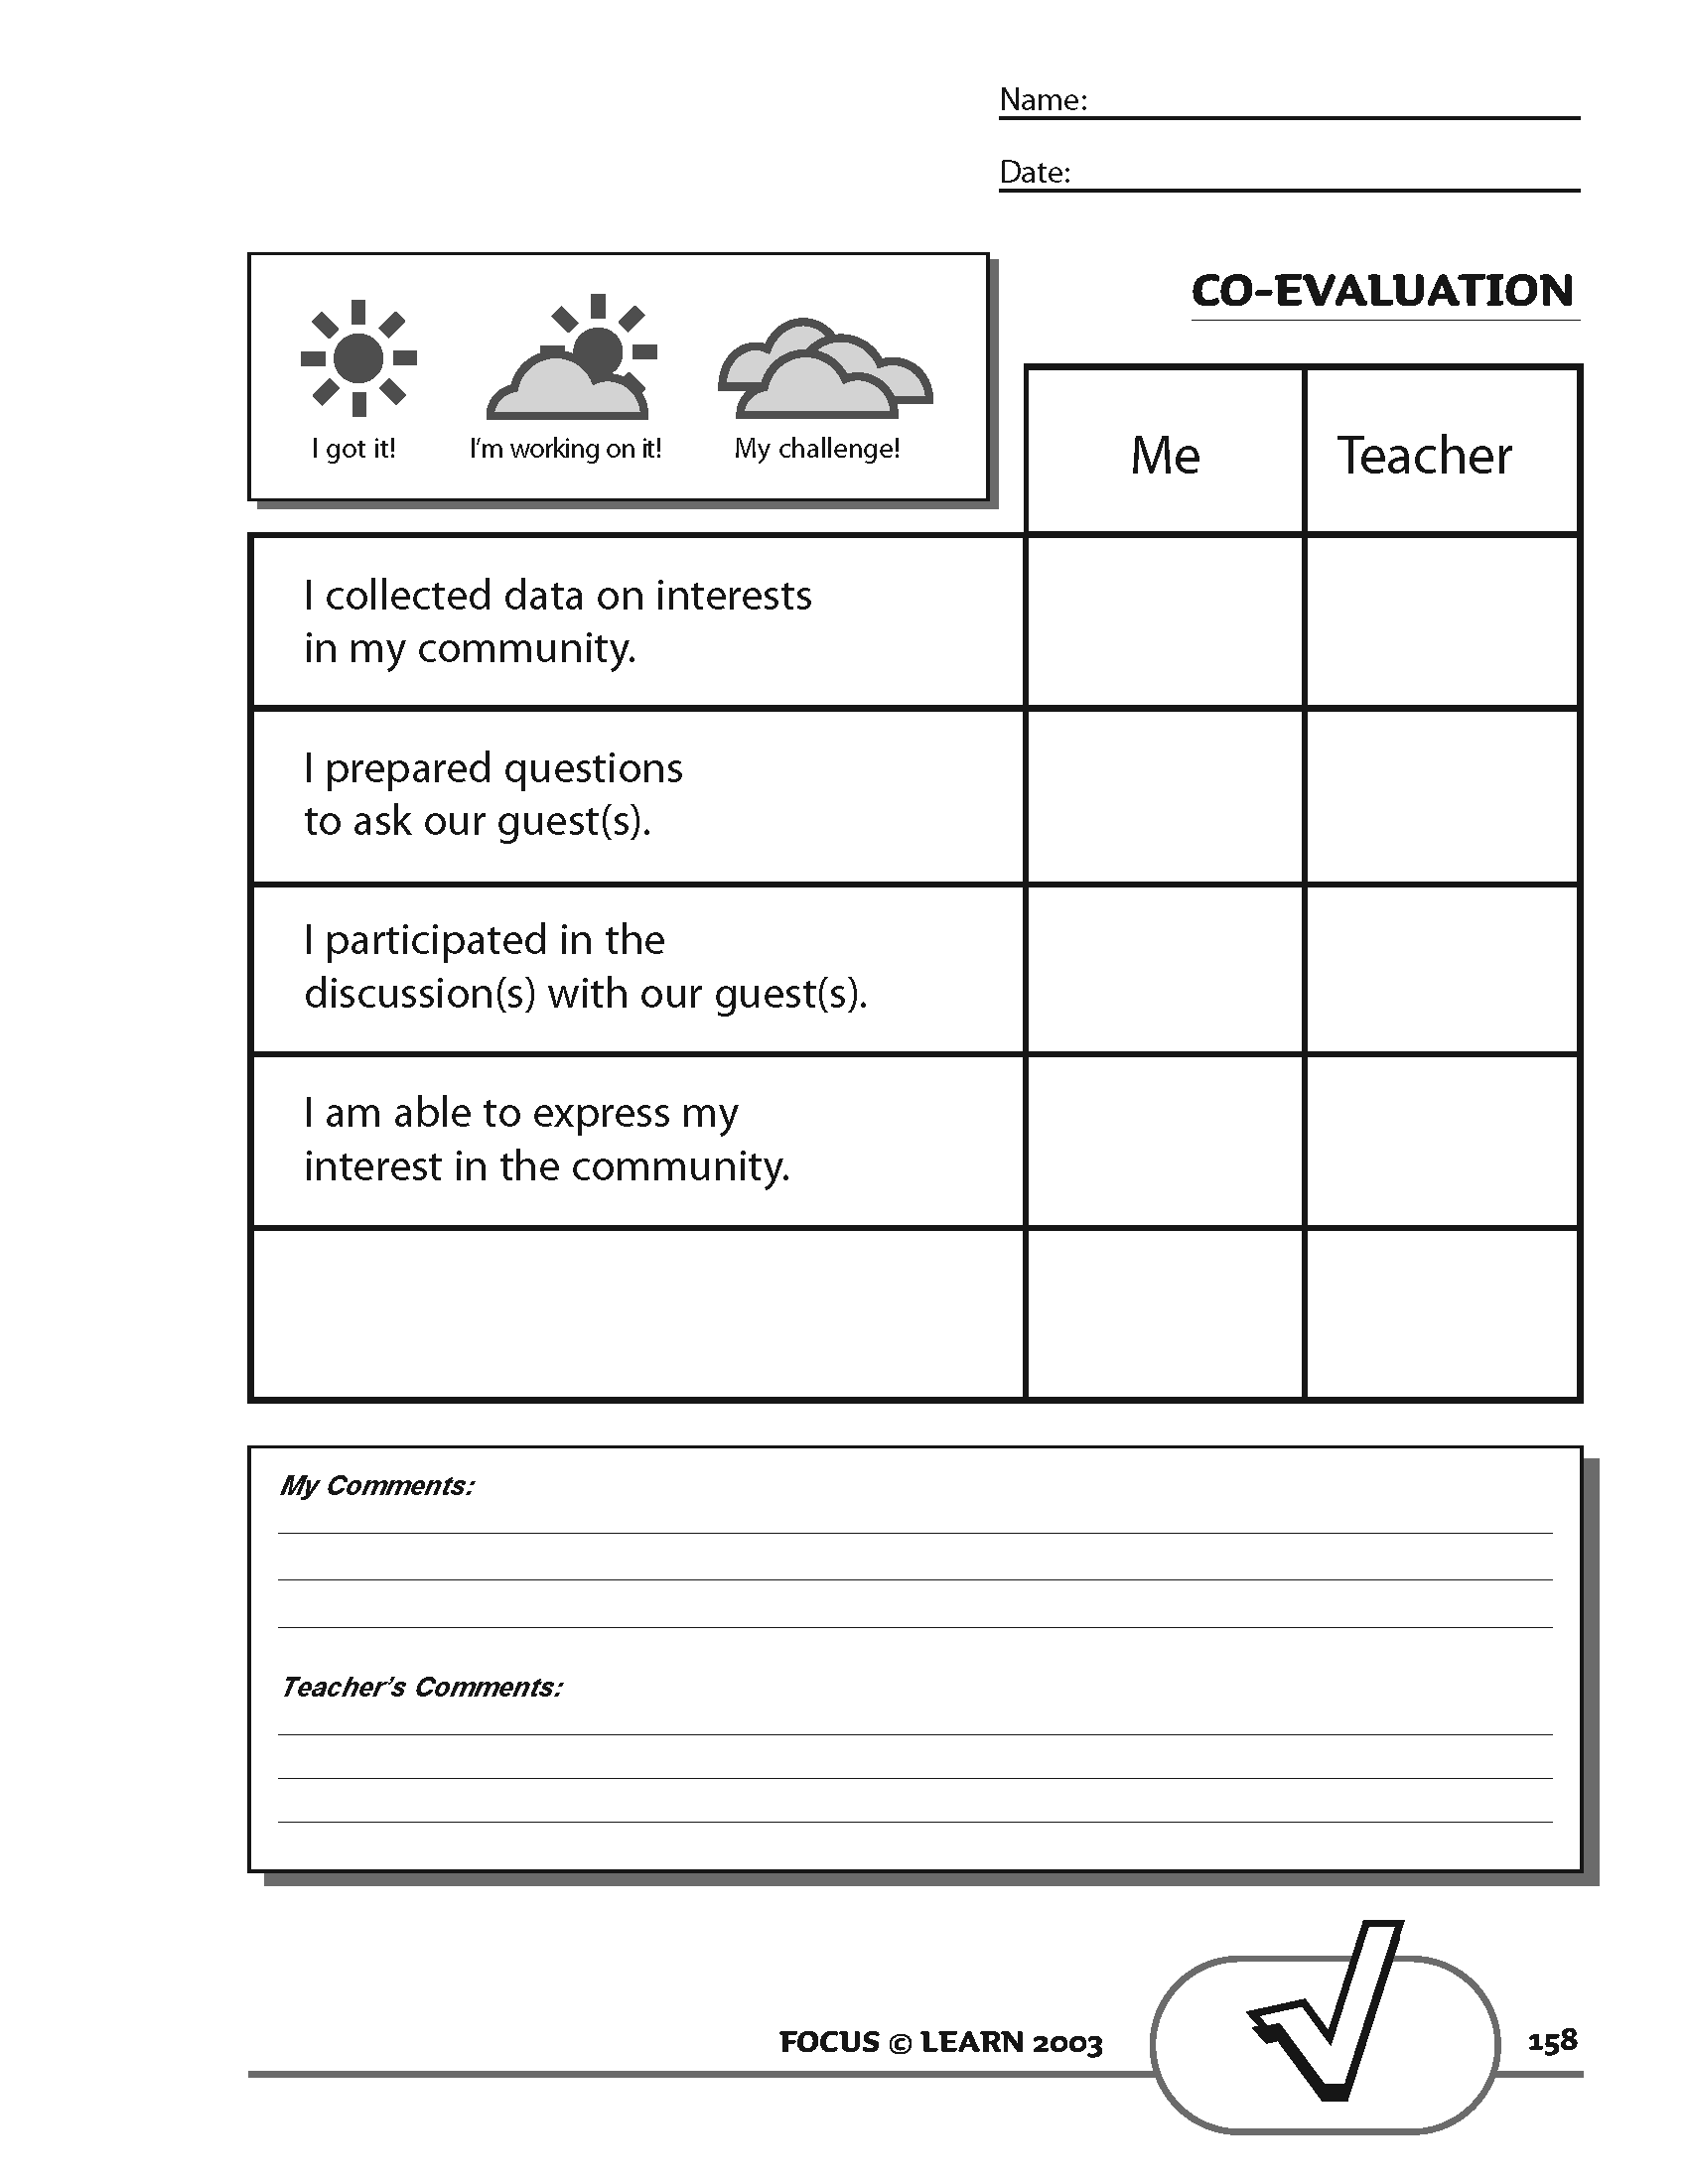 Student and Teacher Co-Evaluation Tool